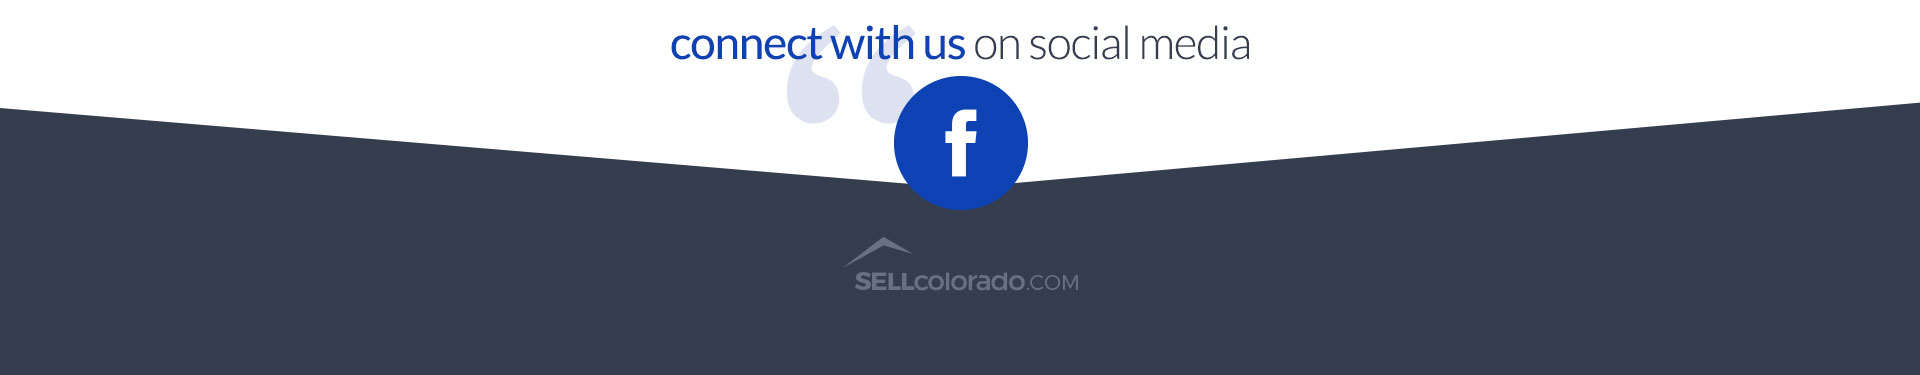 Connect with us on Social Media - Facebook.